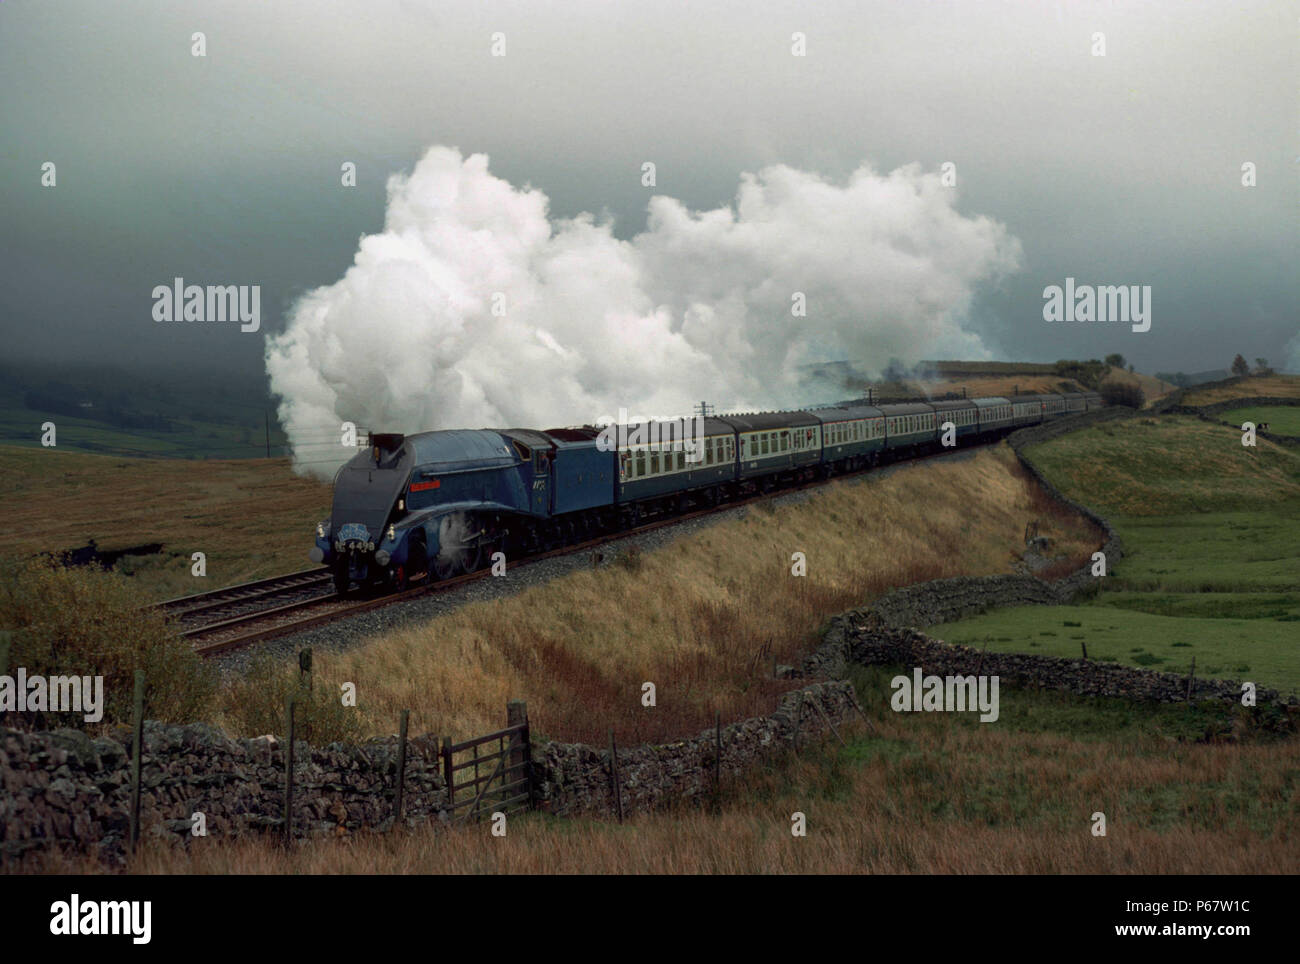 The Aire - Eden Limited. No.4498 Sir Nigel Gresley approaches Ais Gill summit from the south. 21.10.1978. Stock Photo